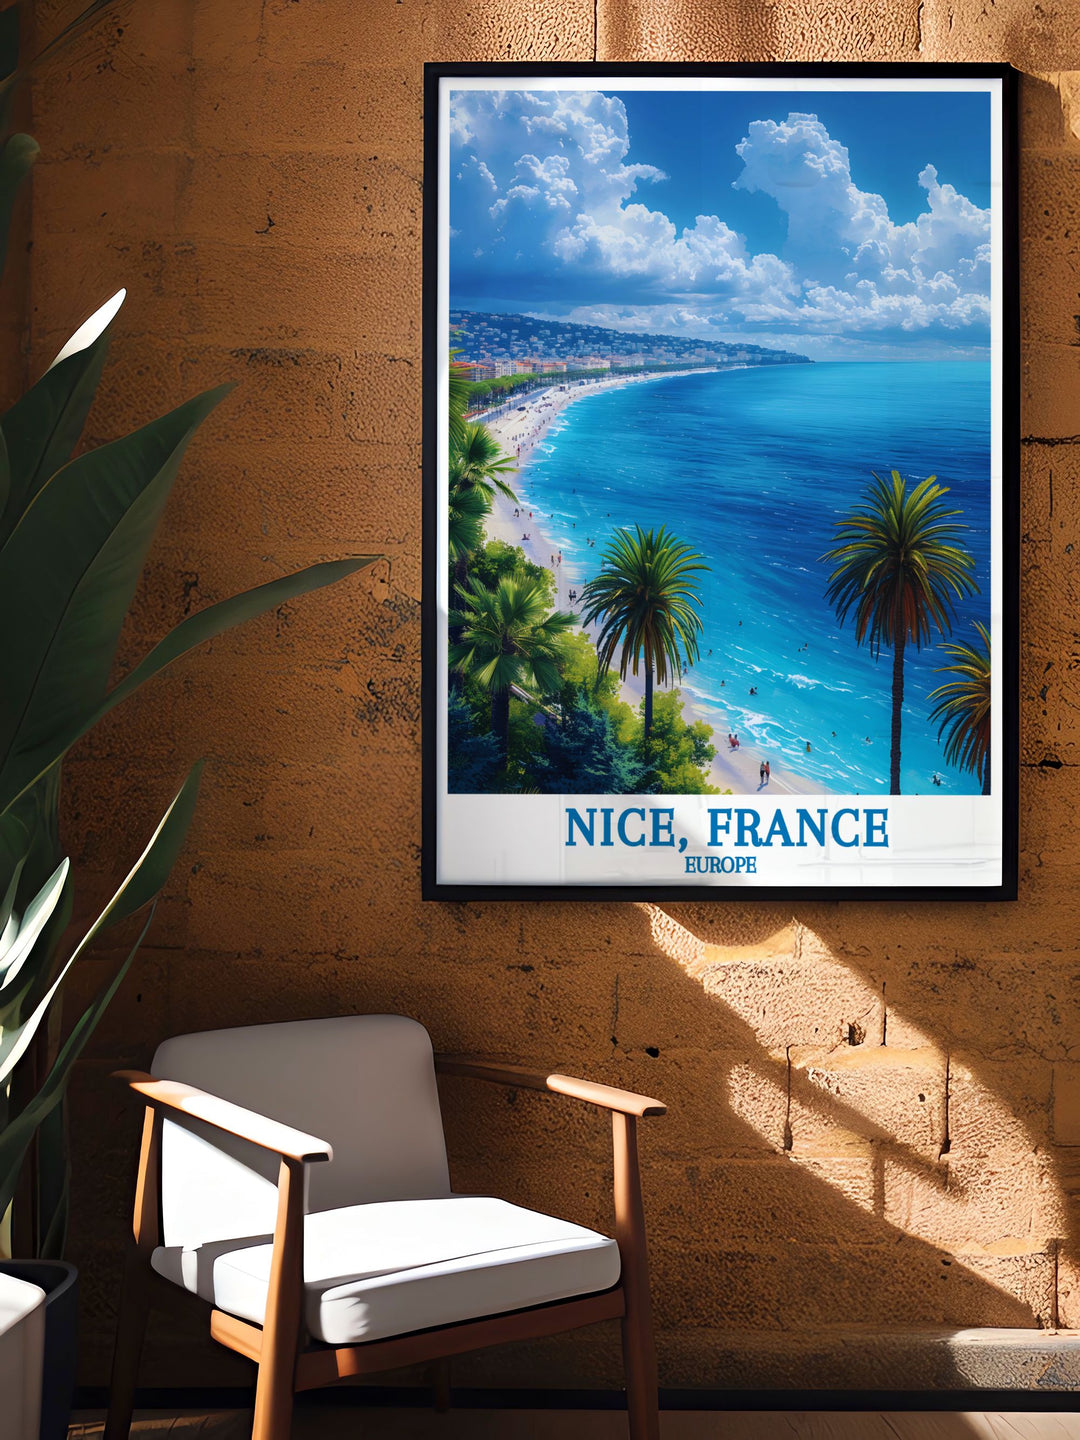 Celebrate the charm of the French Riviera with this travel poster of Promenade des Anglais, showcasing the iconic seafront, palm trees, and beautiful sunsets that make this Nice landmark a must visit destination.